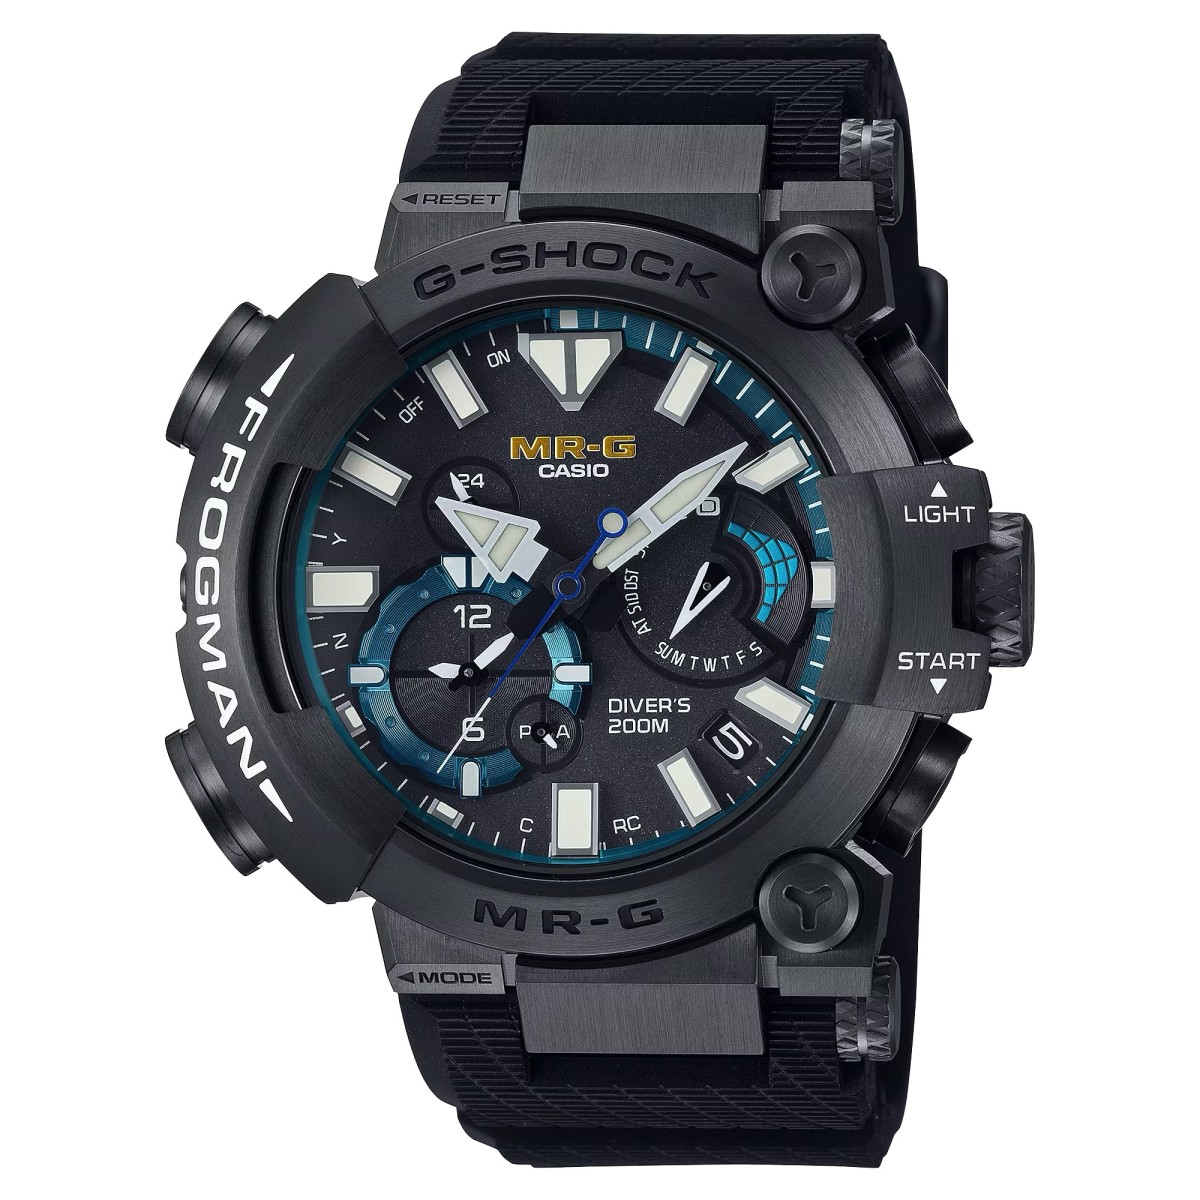 Casio unveils a luxury version of the Frogman for its MR-G line - Acquire